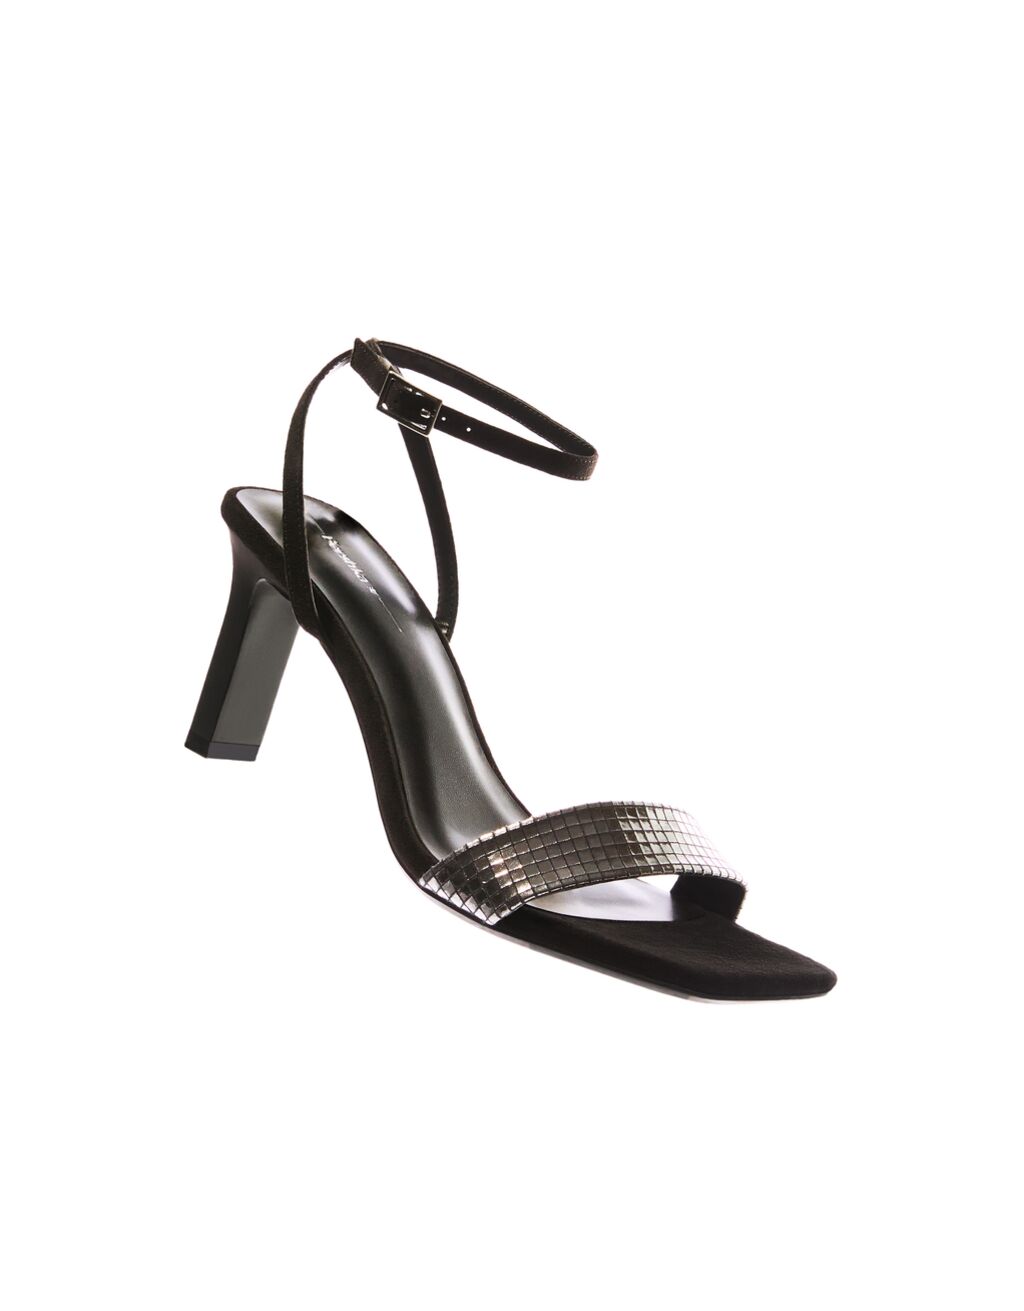 Heeled sandals with an ankle strap and metallic vamp